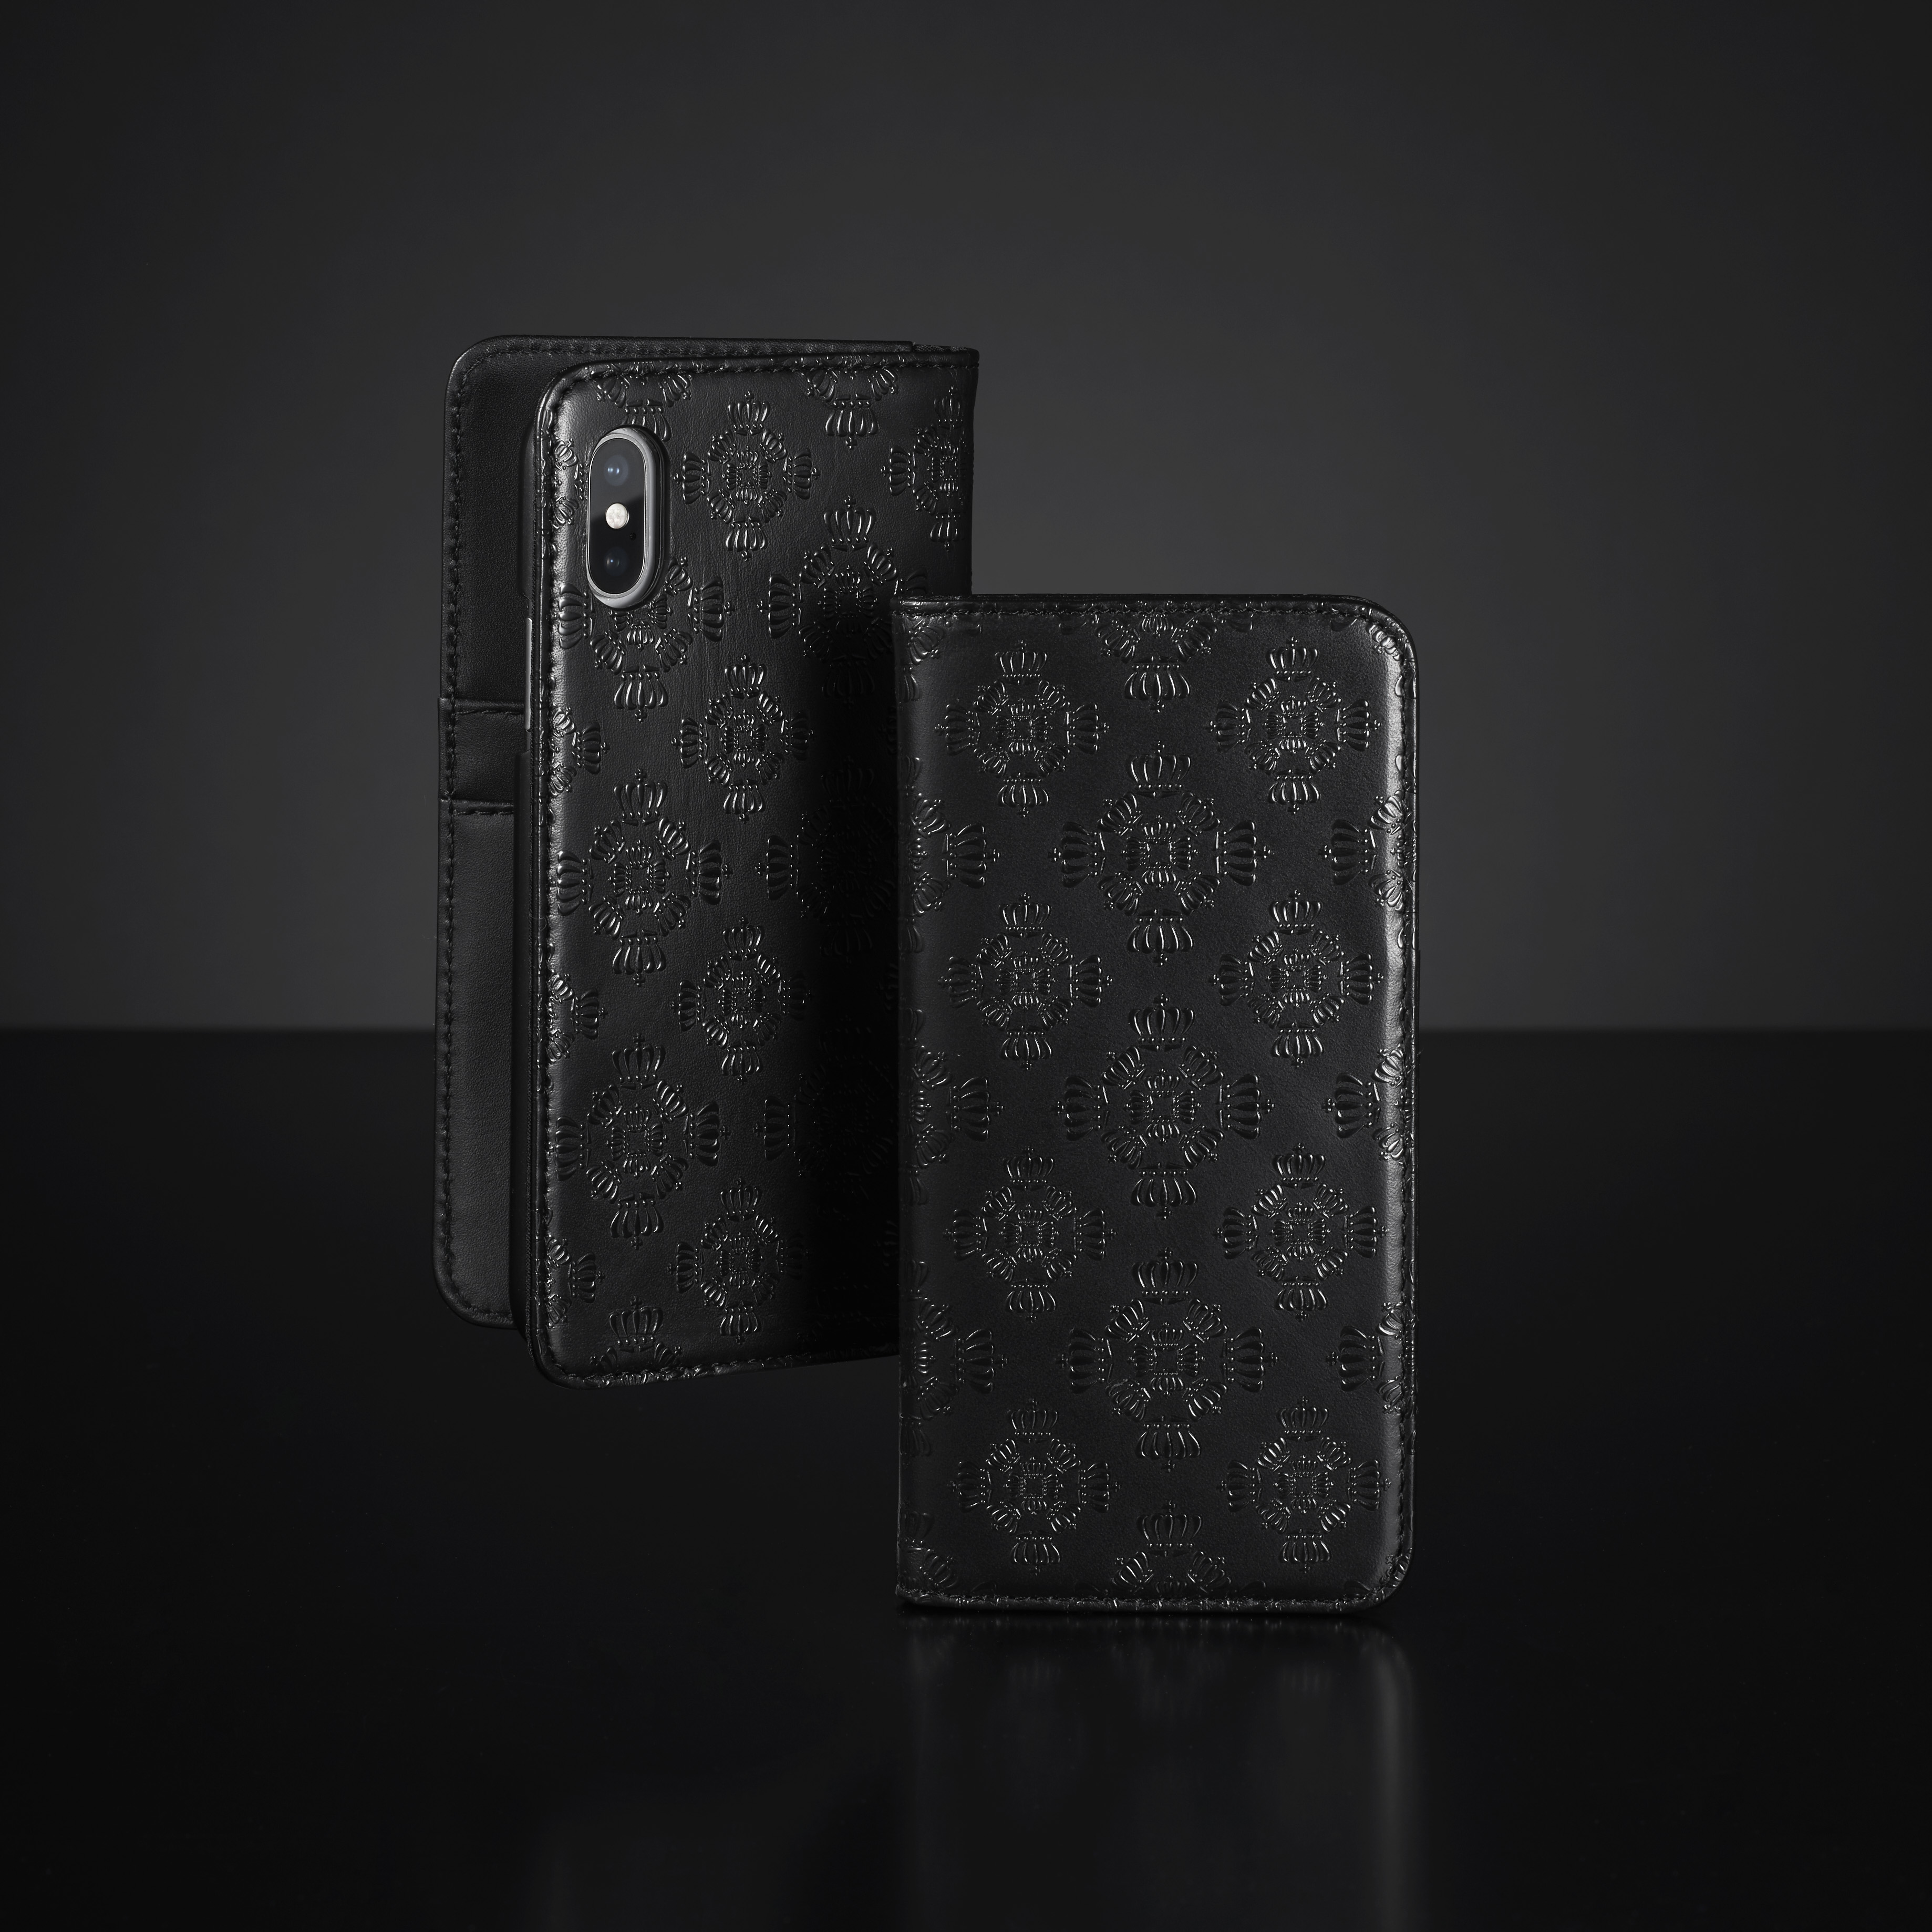 STEPHALIAM” Flip Case for iPhone 8, XS – ジャスティン デイビス 